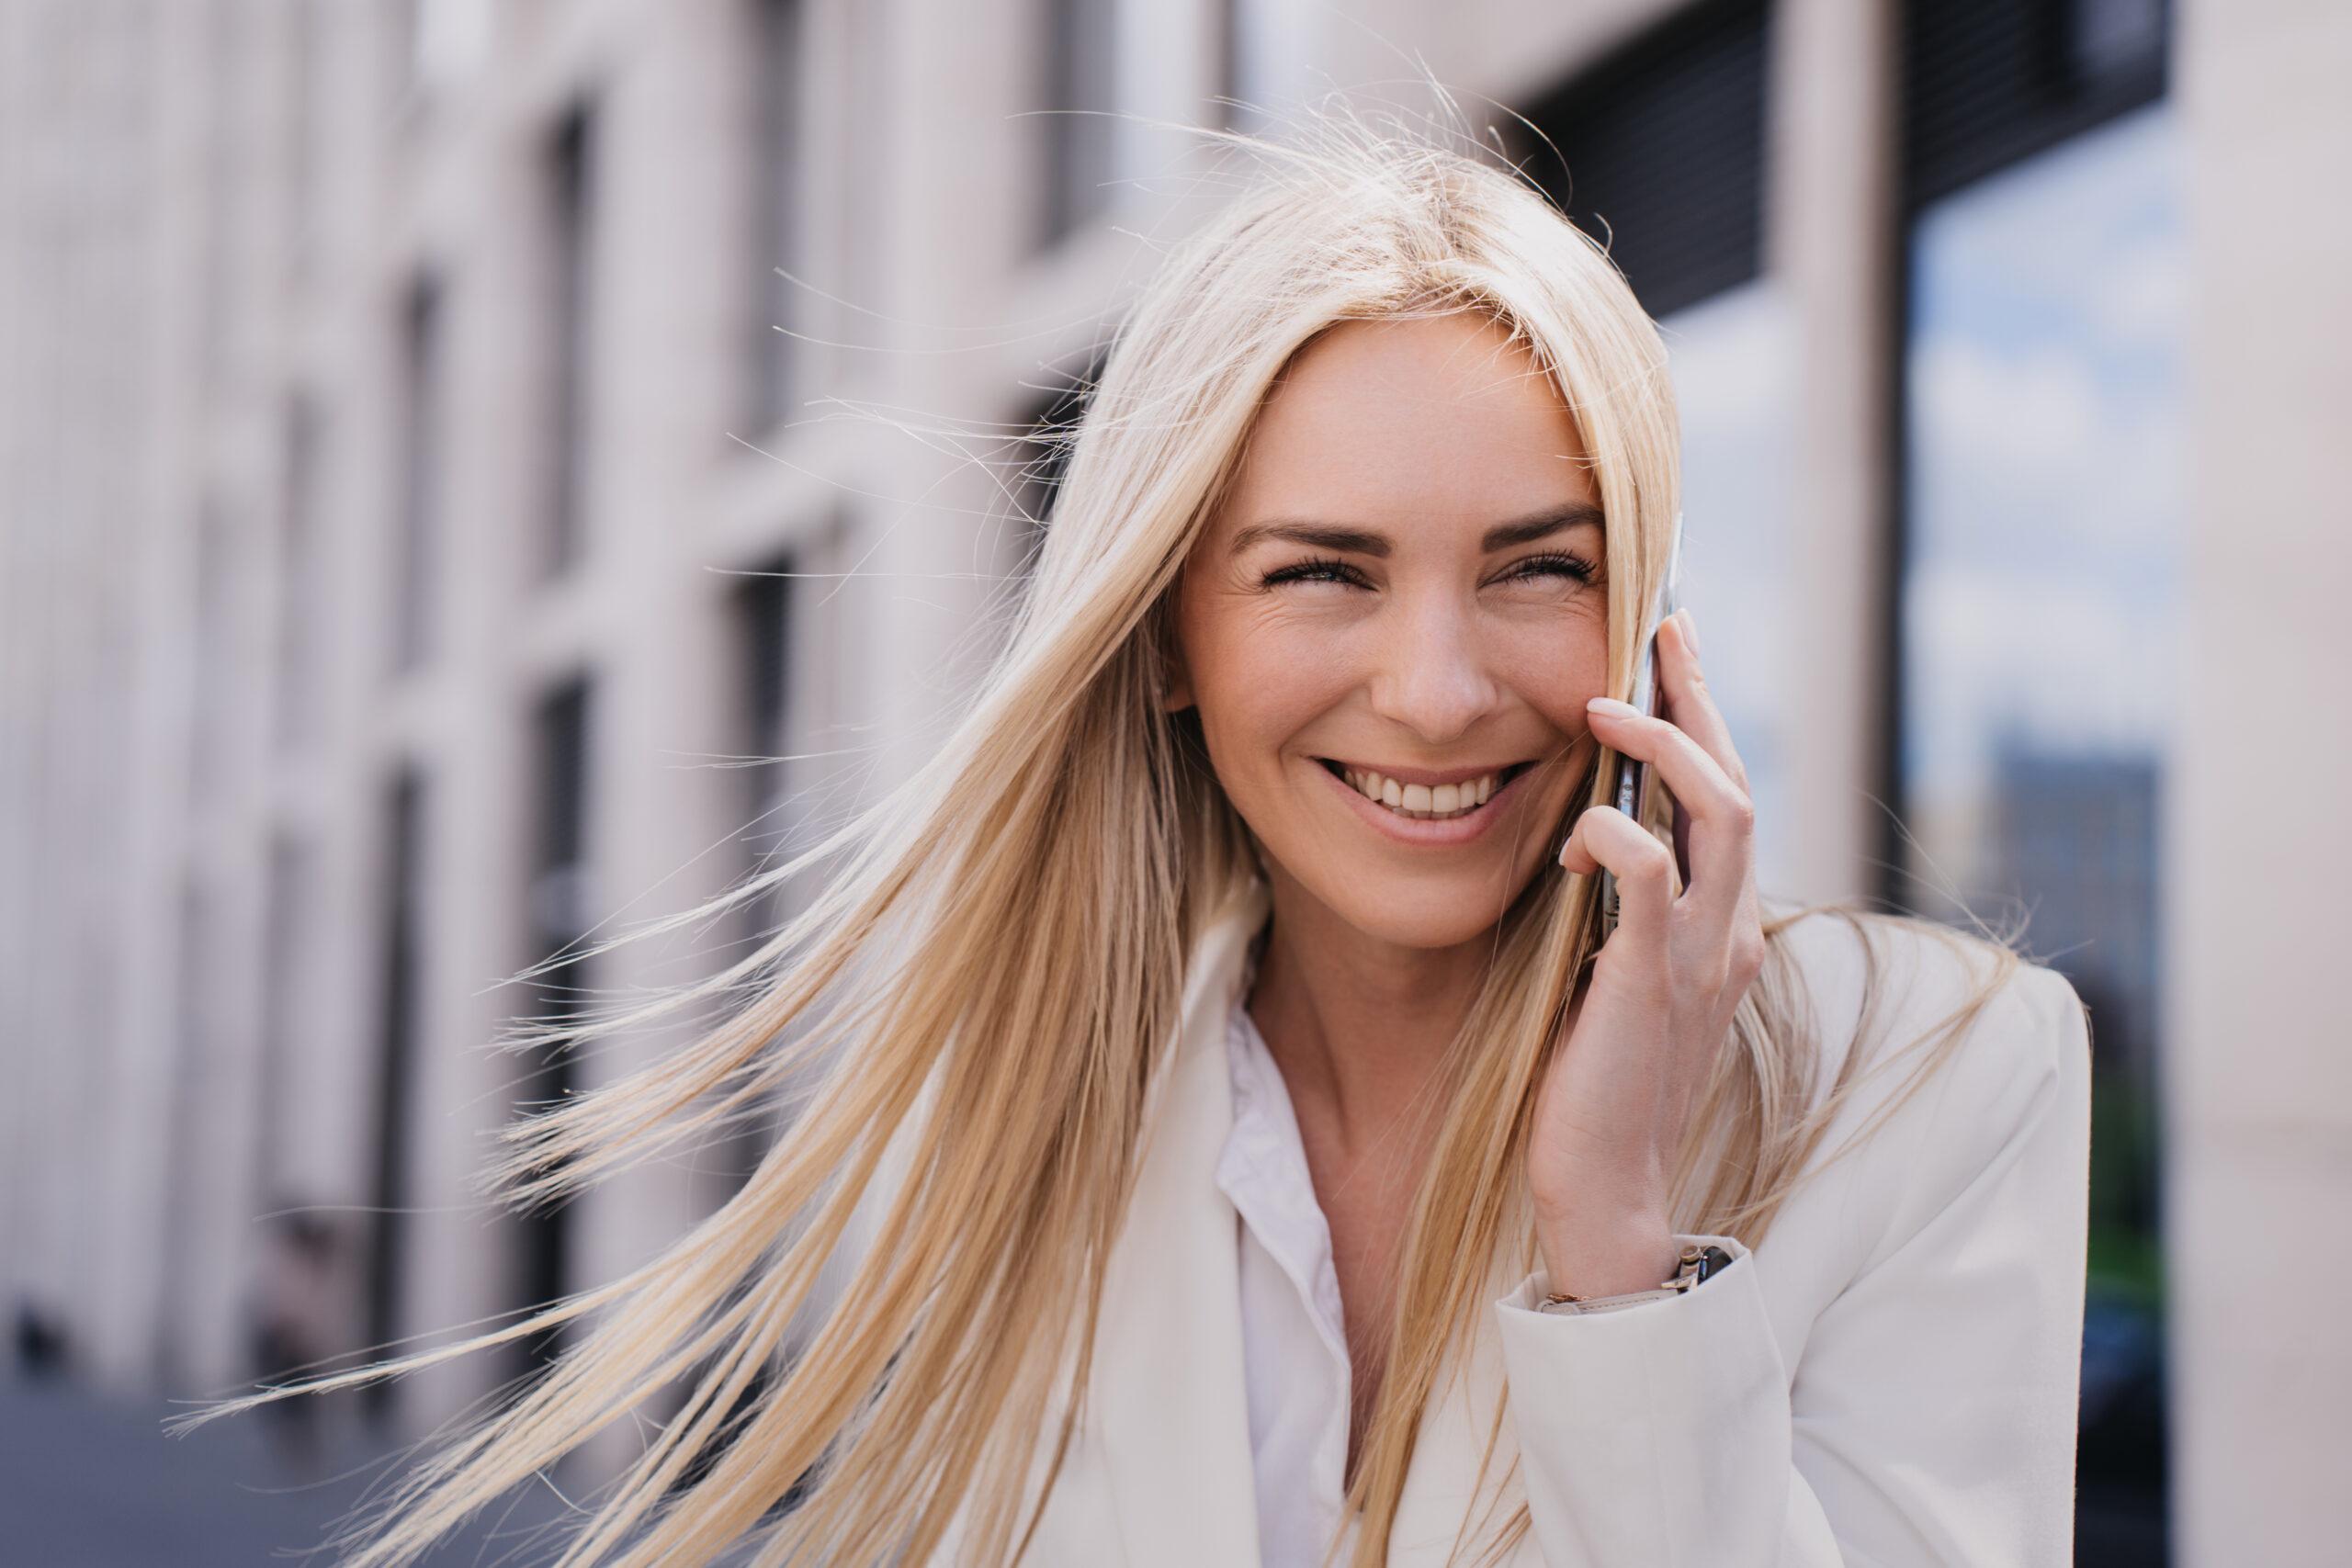 Blonde woman talking on the phone outside